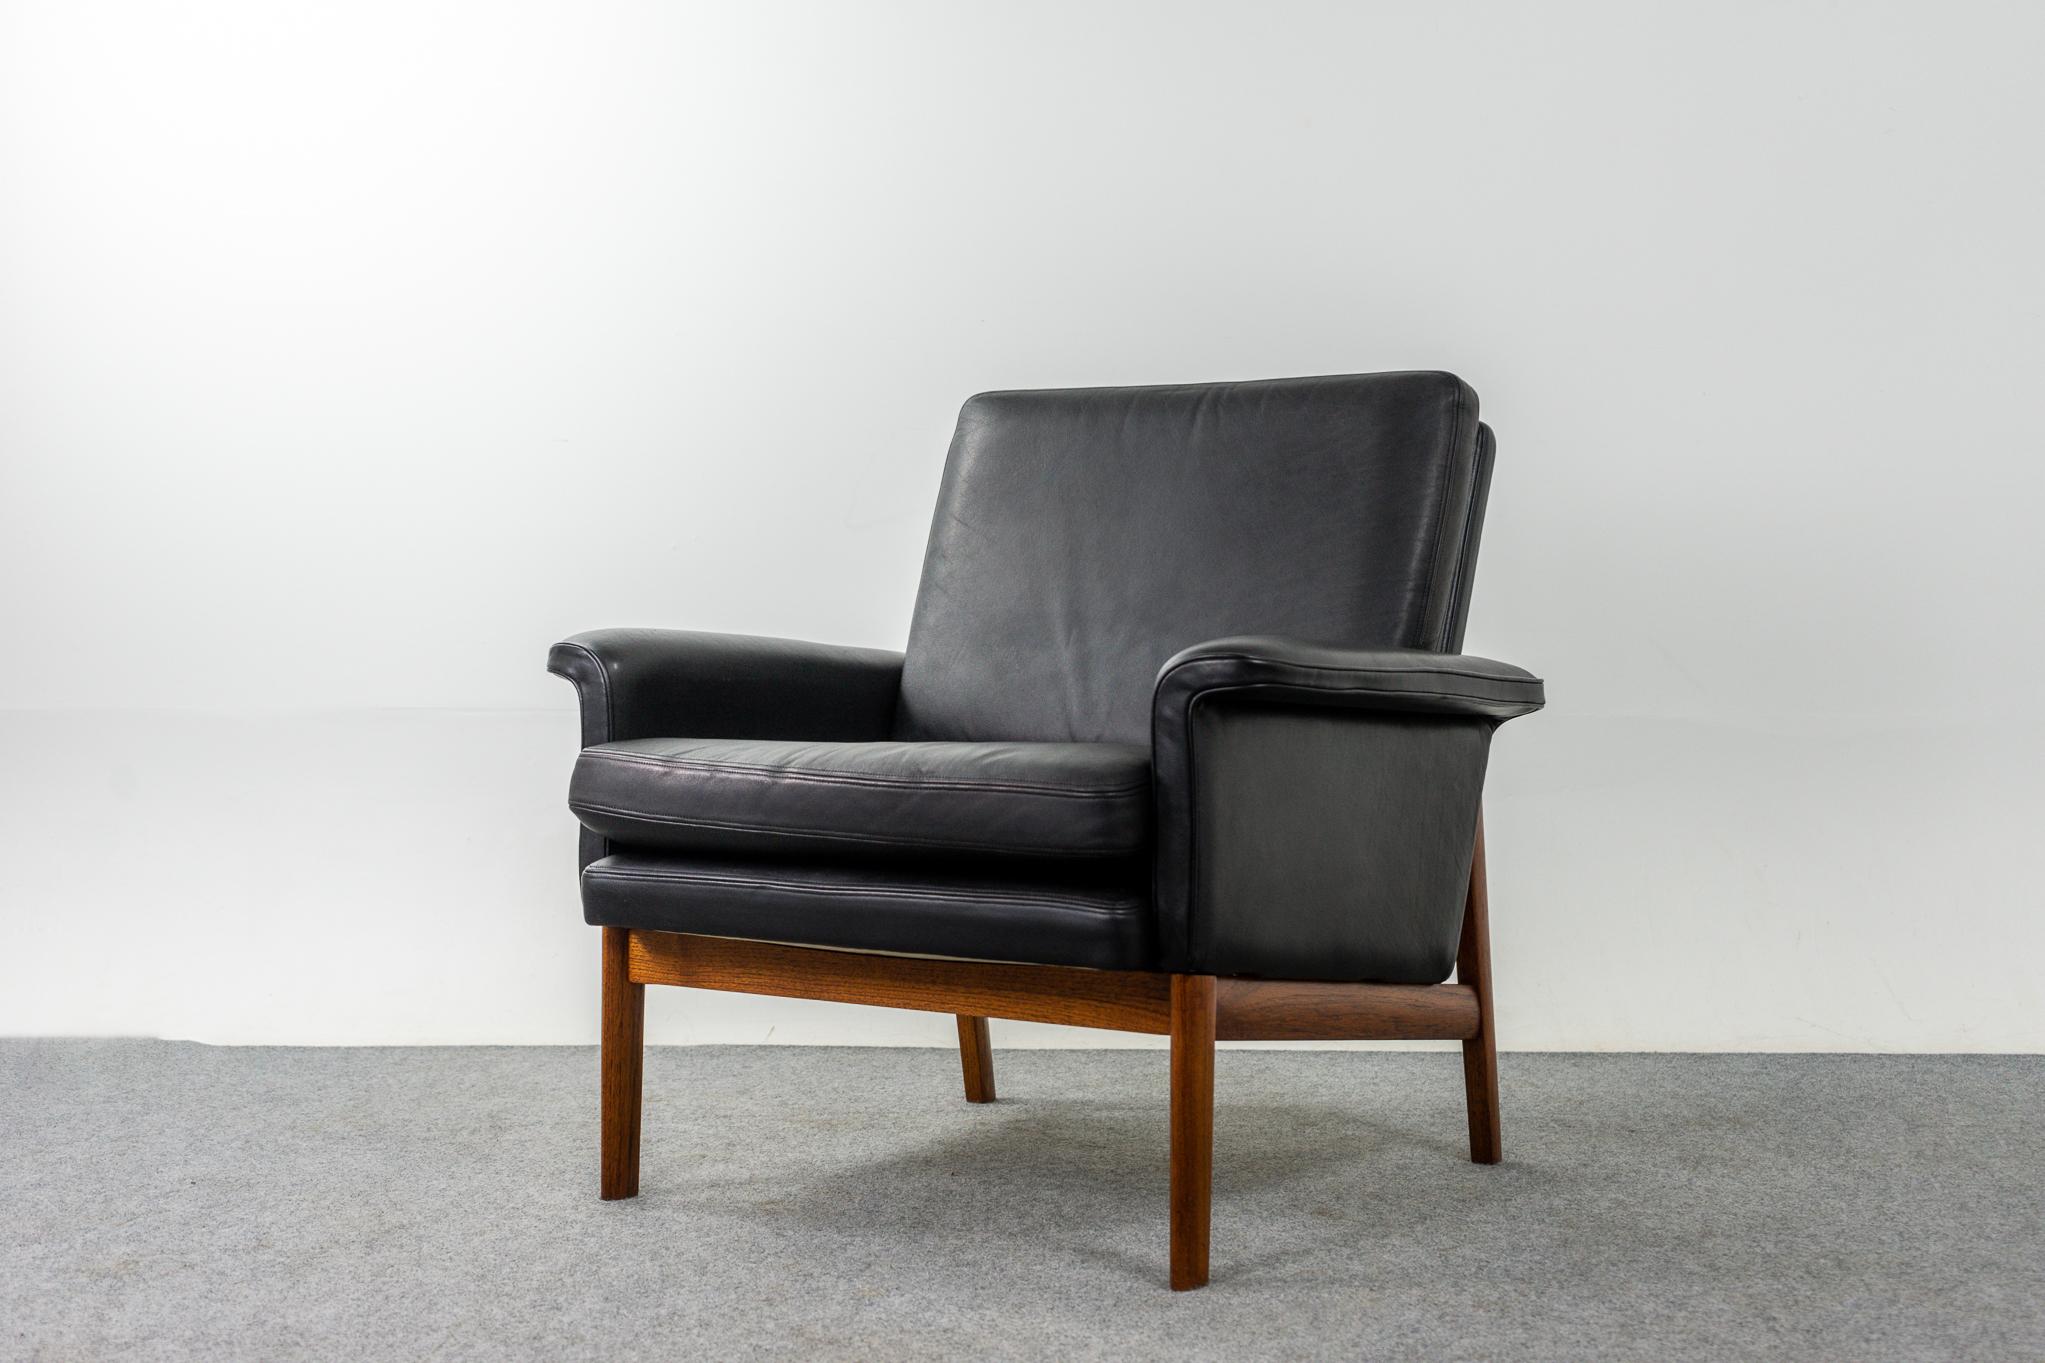 Leather and teak Danish model 218 Jupiter chair by Finn Juhl for France & Son, circa 1960's. Iconic chair features beautiful pitch black leather with perfect patina. Elegant teak base contrasts beautifully with the upholstery. Perfectly angled for